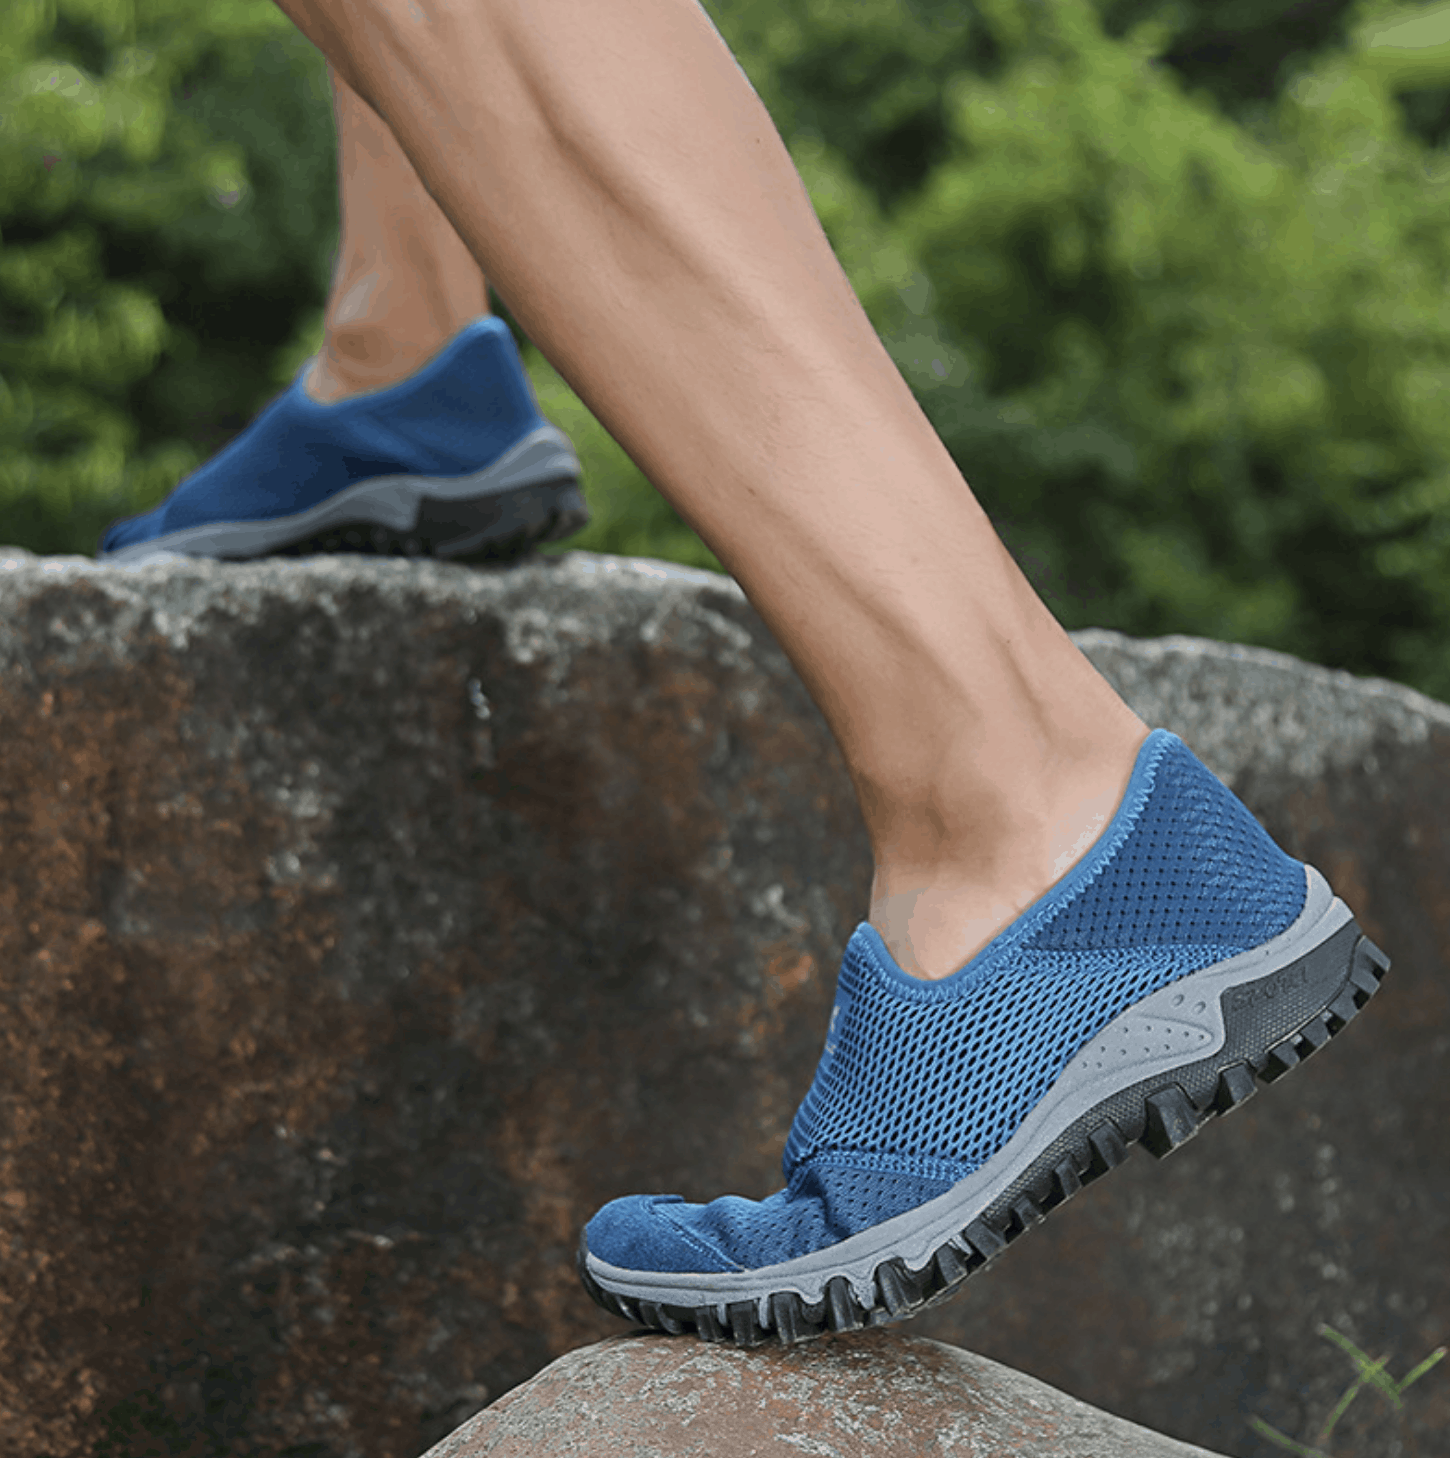 Summer Outdoor Hiking Shoes, Hiking Shoes, Hiking Shoes Malaysia, Best Hiking Shoes, Waterproof Hiking Shoes, Cheap Hiking Shoes Malaysia, kasut sports, sports shoe